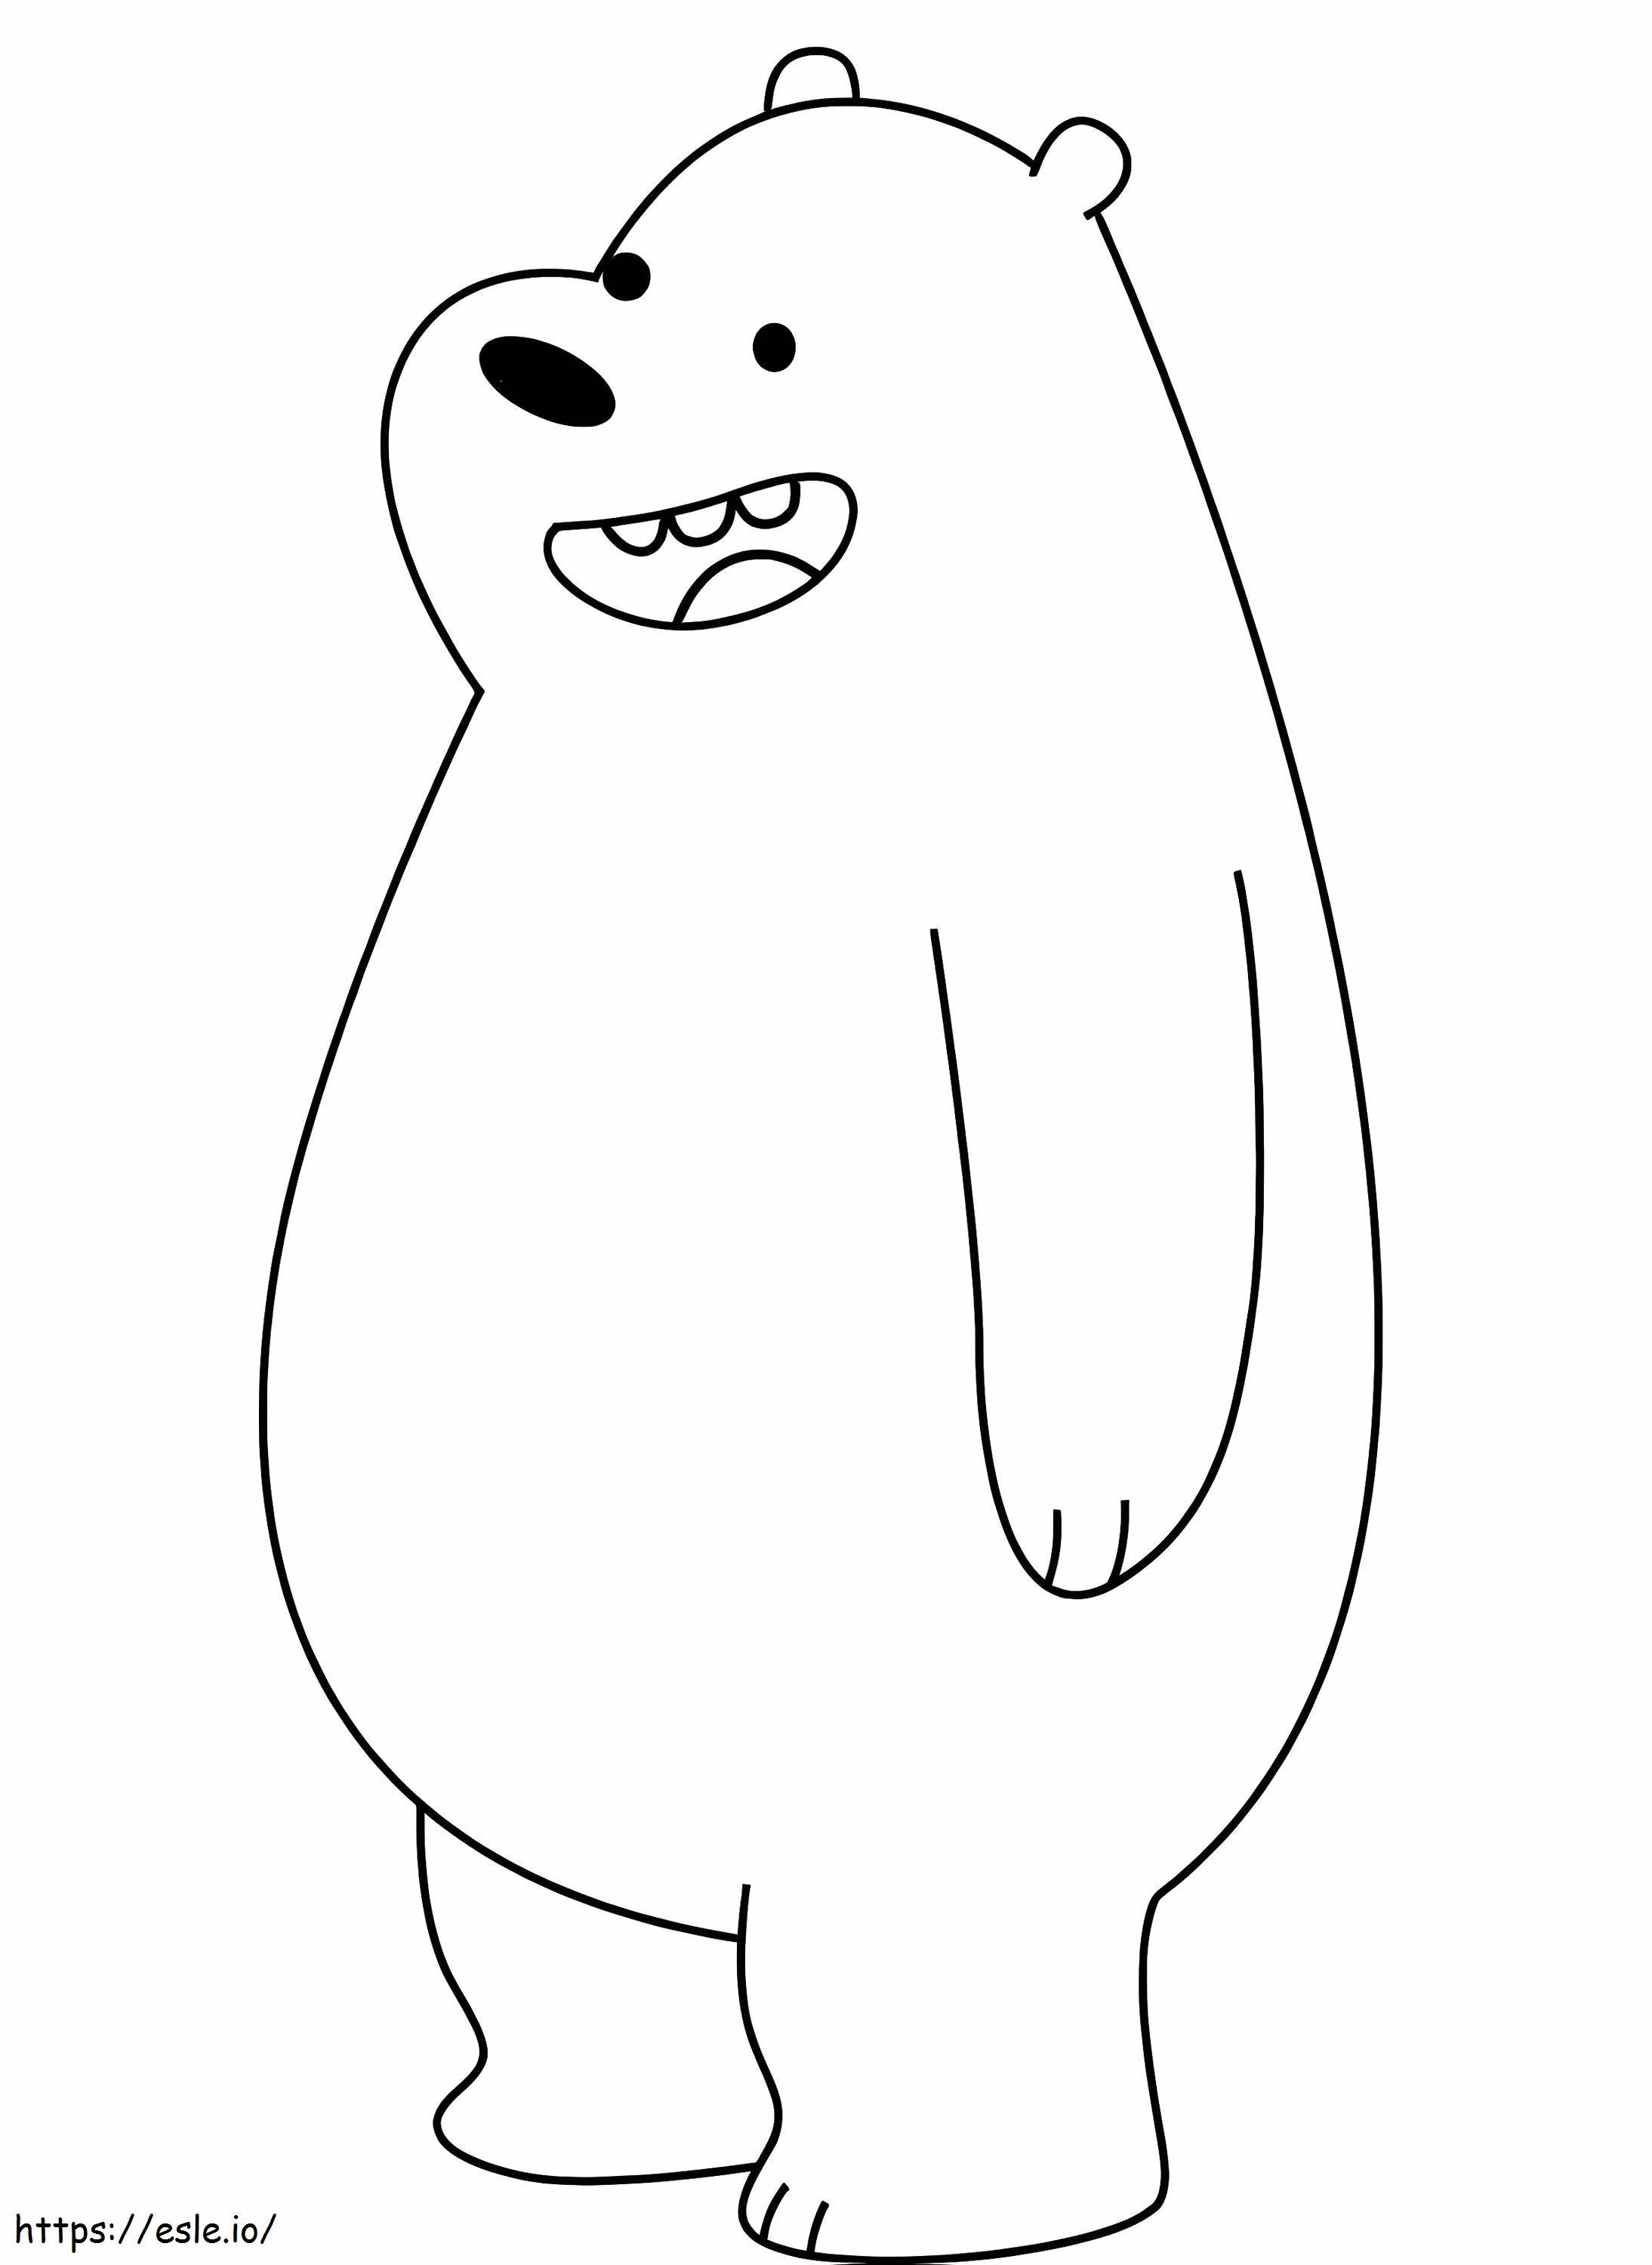 Brown Bear Laughing coloring page